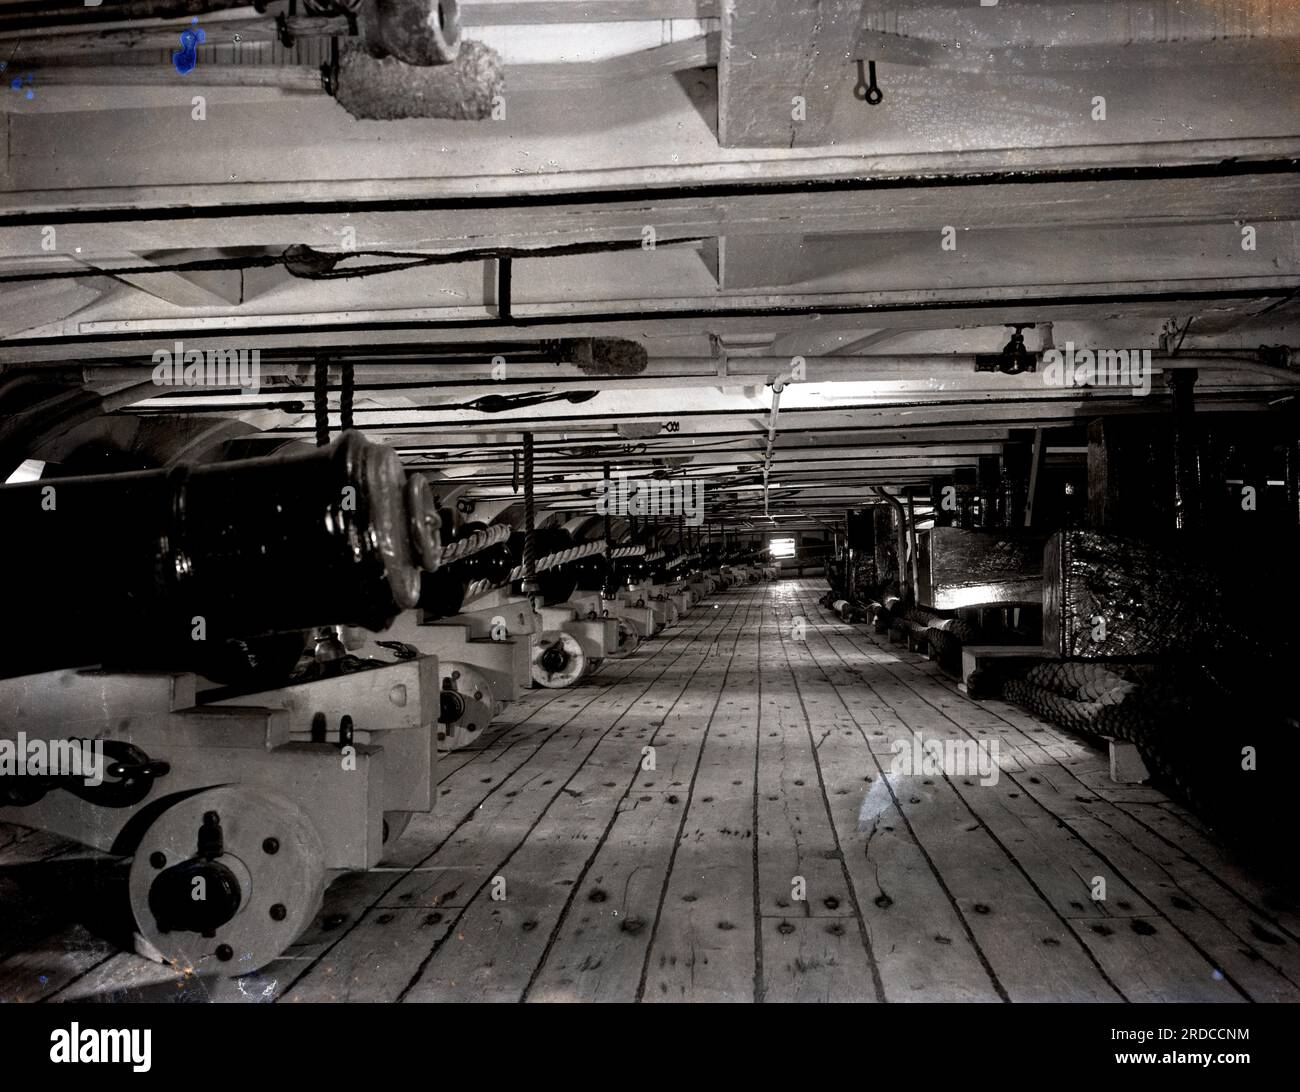 H.M.S.Victory, Lord Nelson;s flagship at the Battle of Trafalgar. Interior and exterior images from 1940. Stock Photo